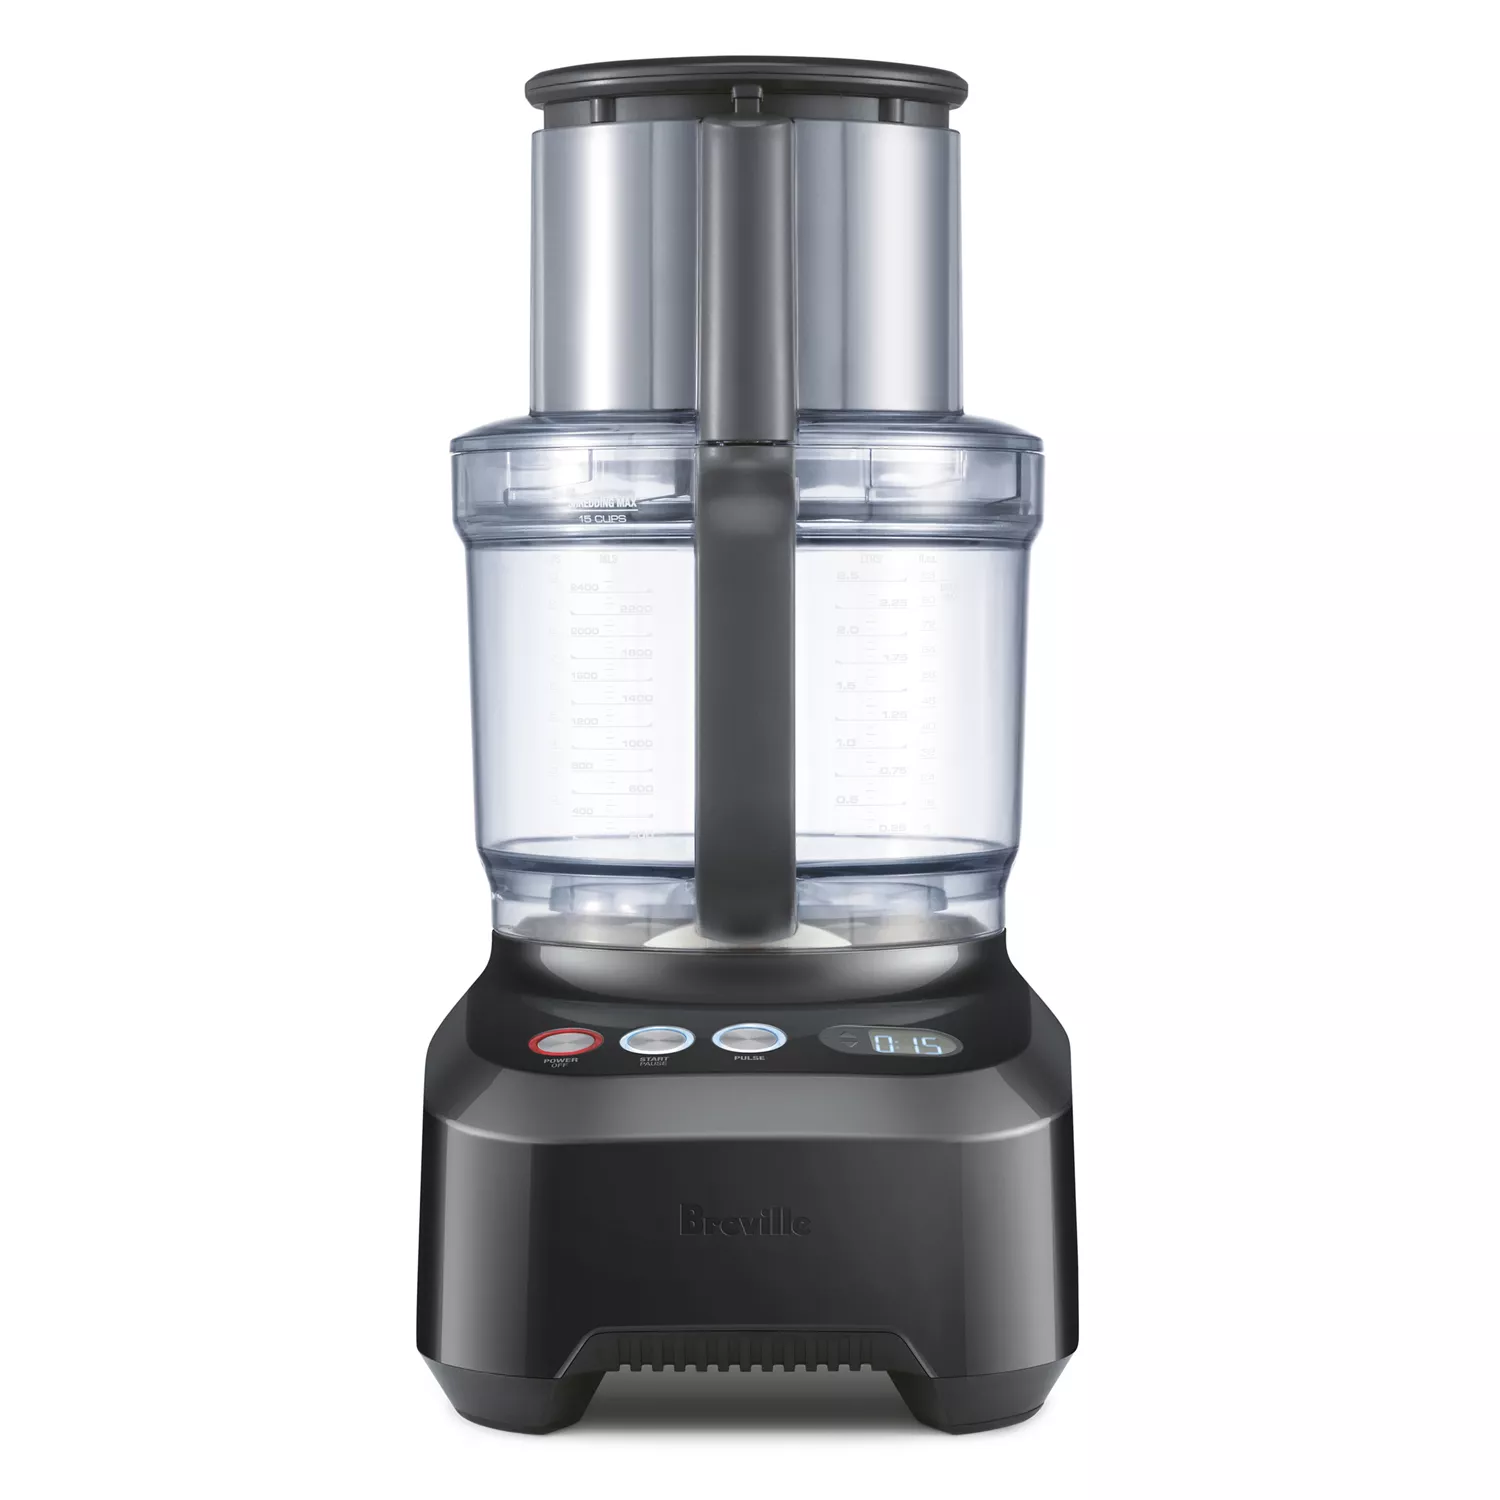 Breville ® Sous Chef ® 12-Cup Food Processor